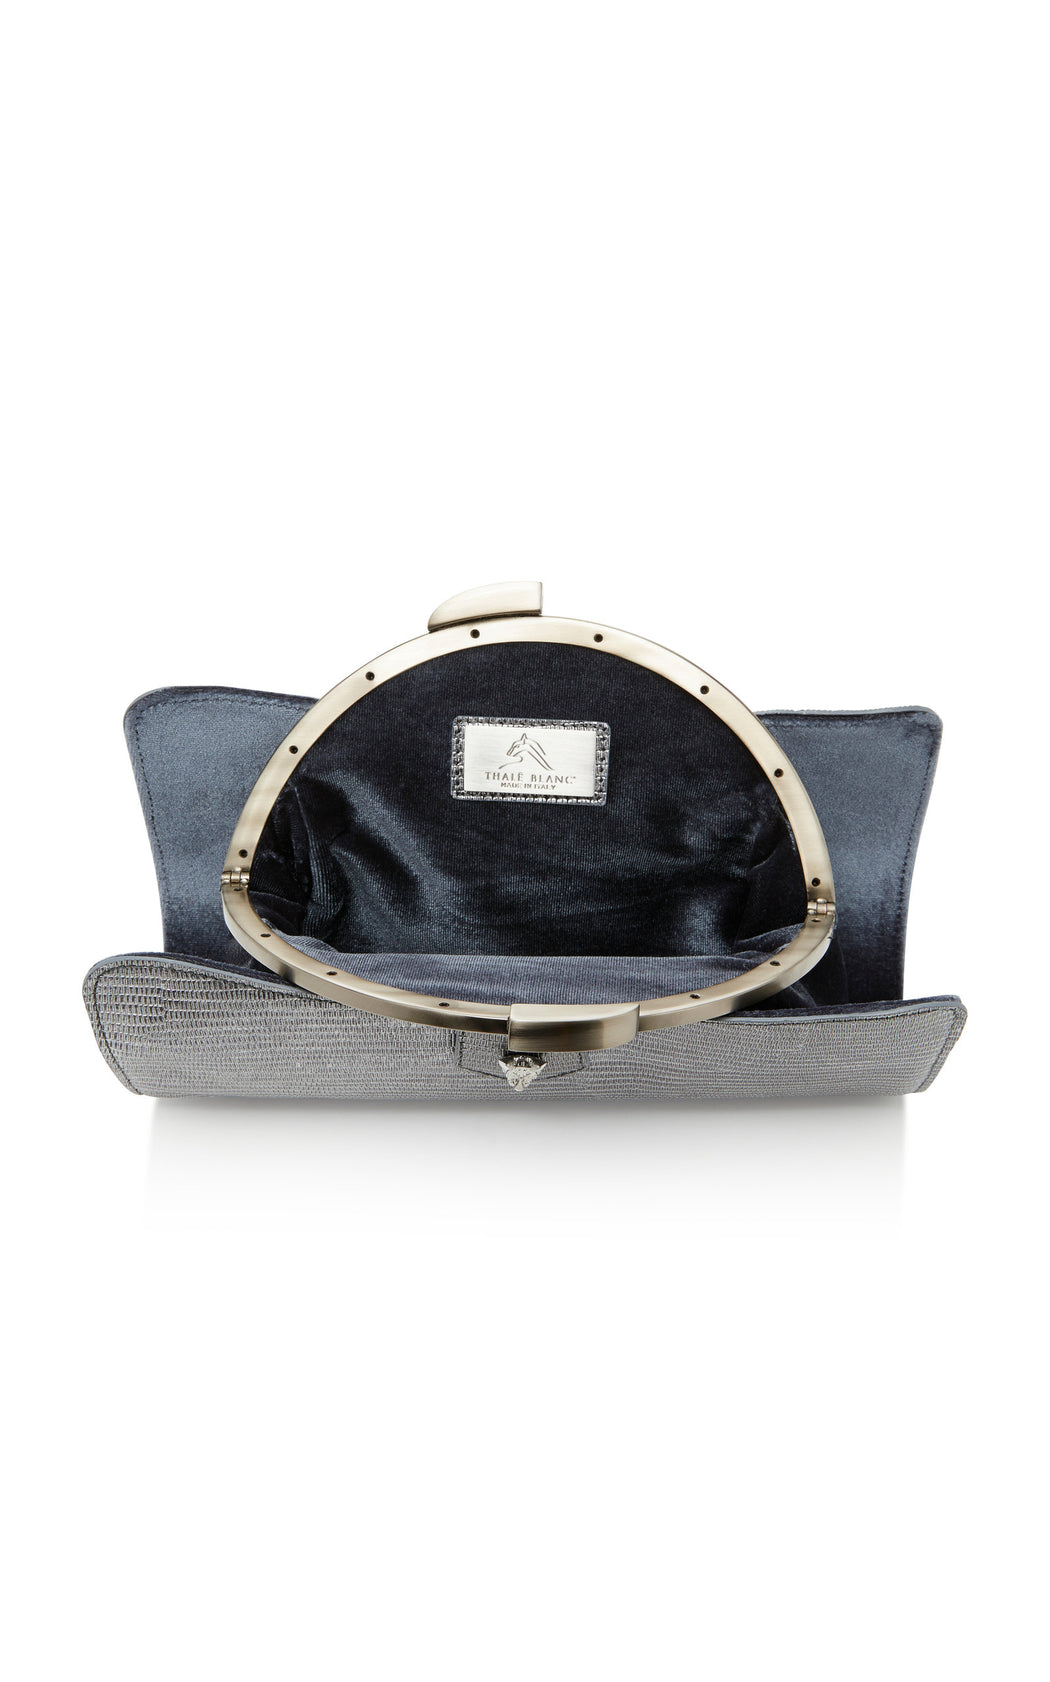 Two looks from one luxury handbag. Silver lizard-embossed calf leather outer layer reveals a rich gray velvet pouch with a gold-toned snap closure. Fits all size smart phones.